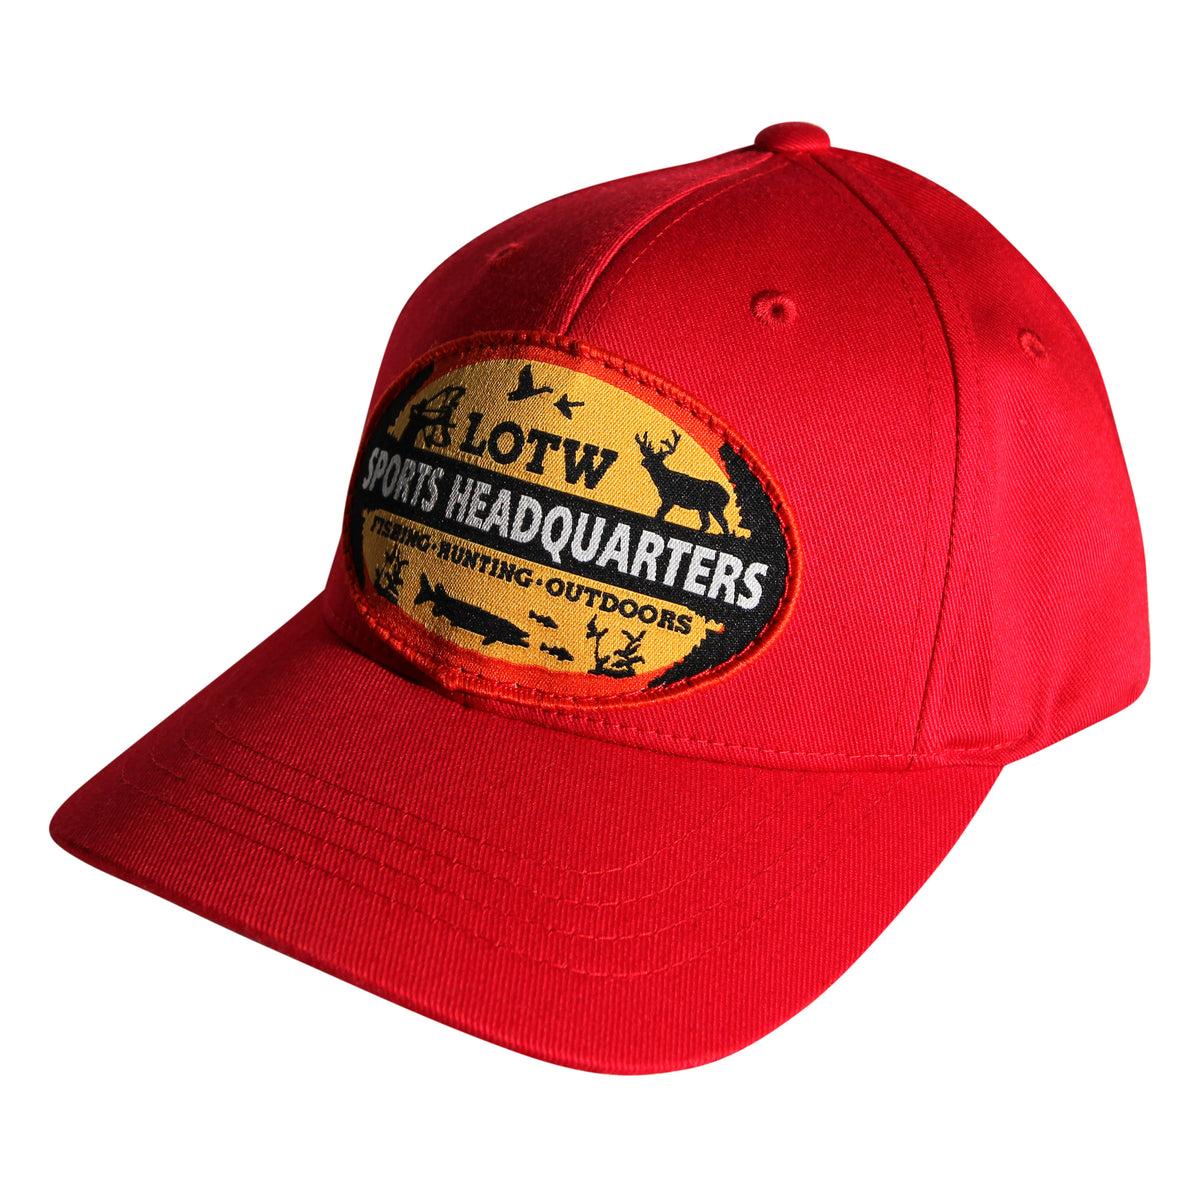 LOTW Sports Headquarters Flexfit Youth Hat - Red